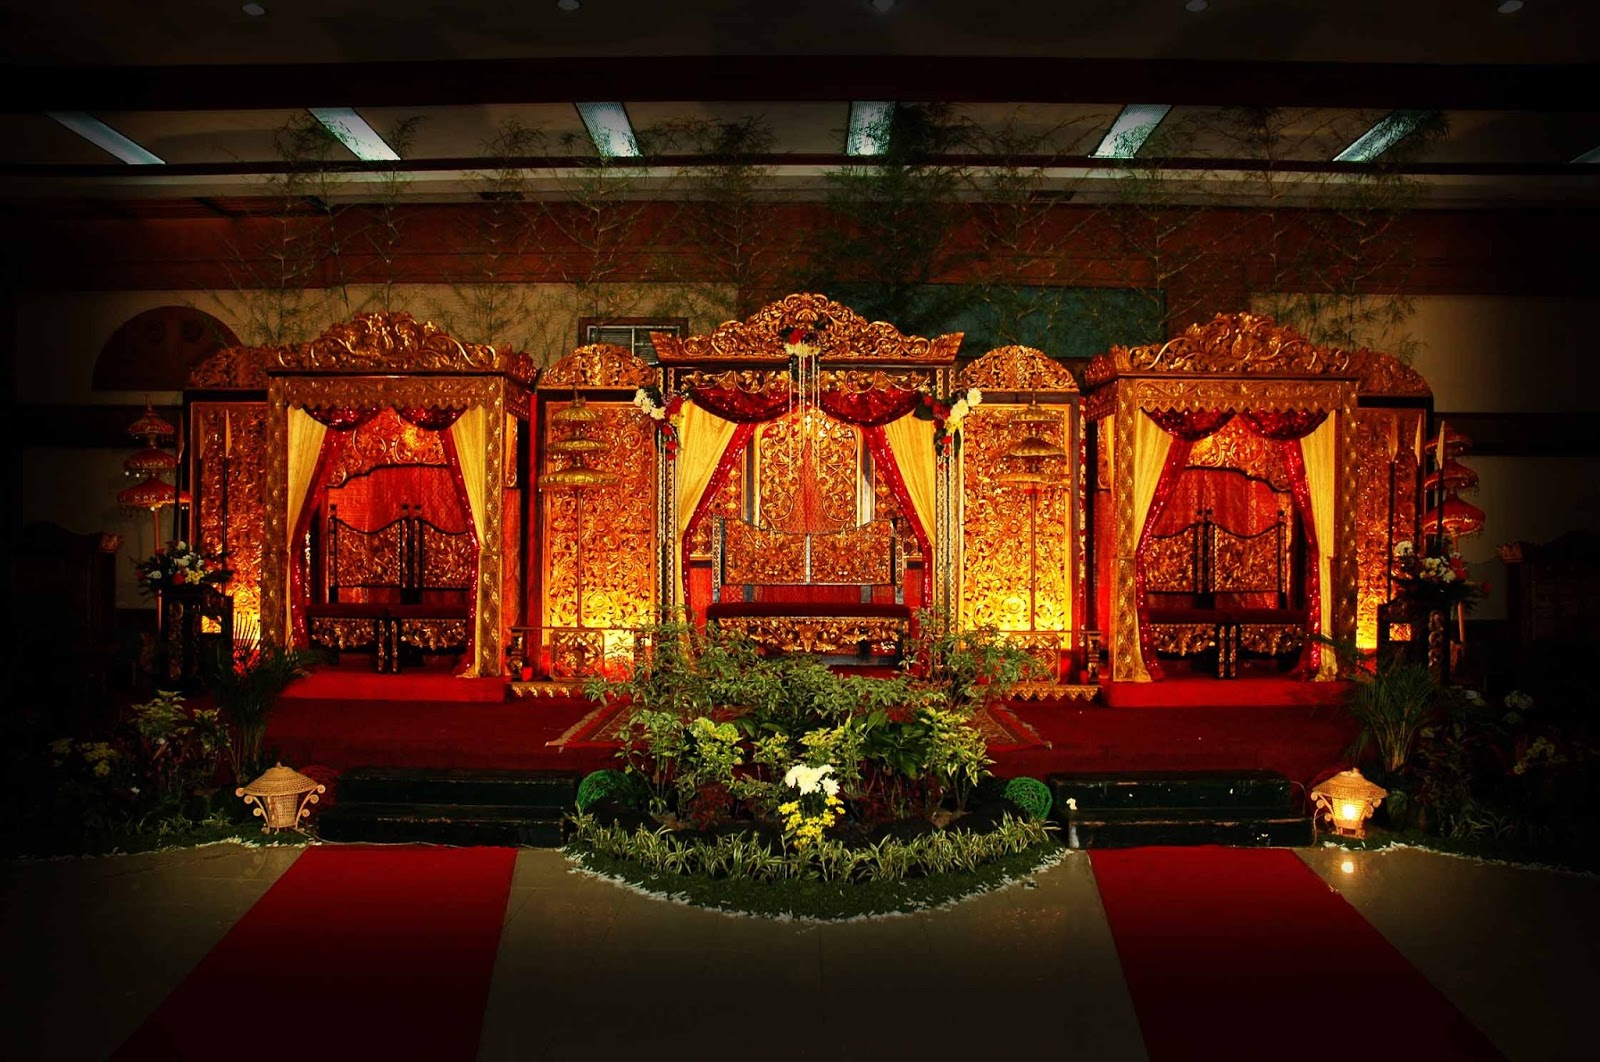 about marriage: marriage decoration photos 2013 | marriage stage